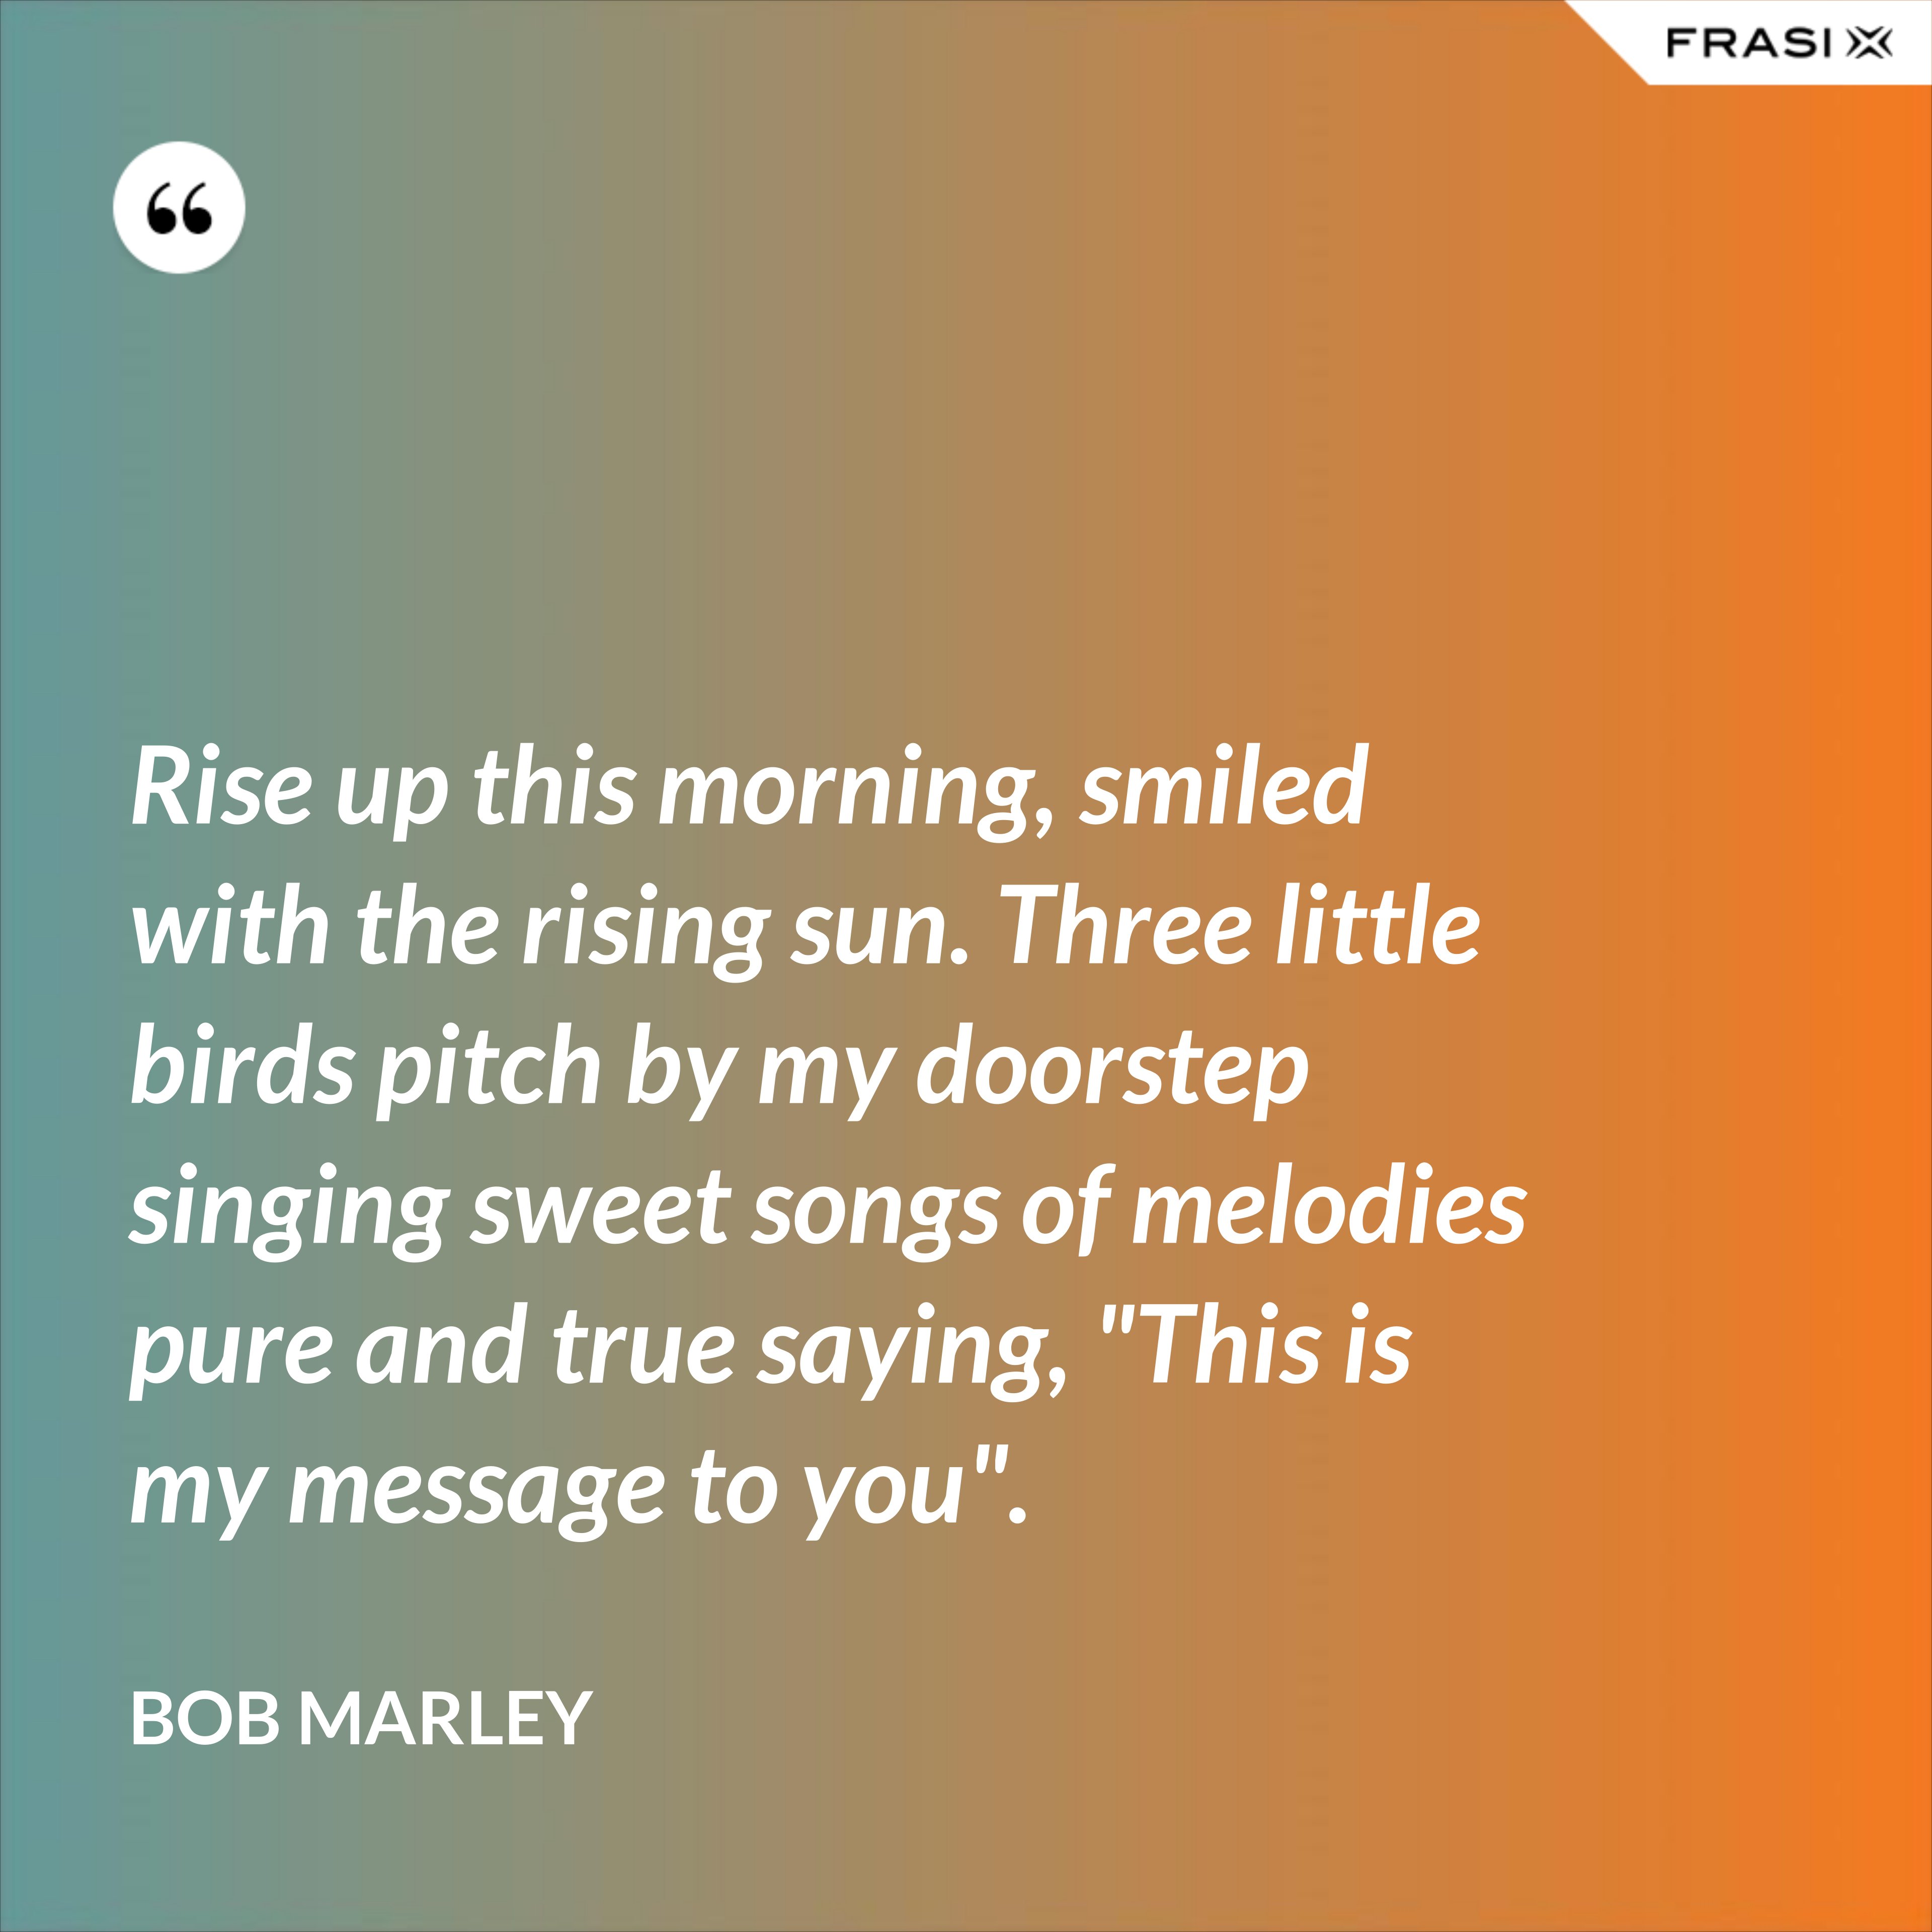 Rise up this morning, smiled with the rising sun. Three little birds pitch by my doorstep singing sweet songs of melodies pure and true saying, "This is my message to you". - Bob Marley